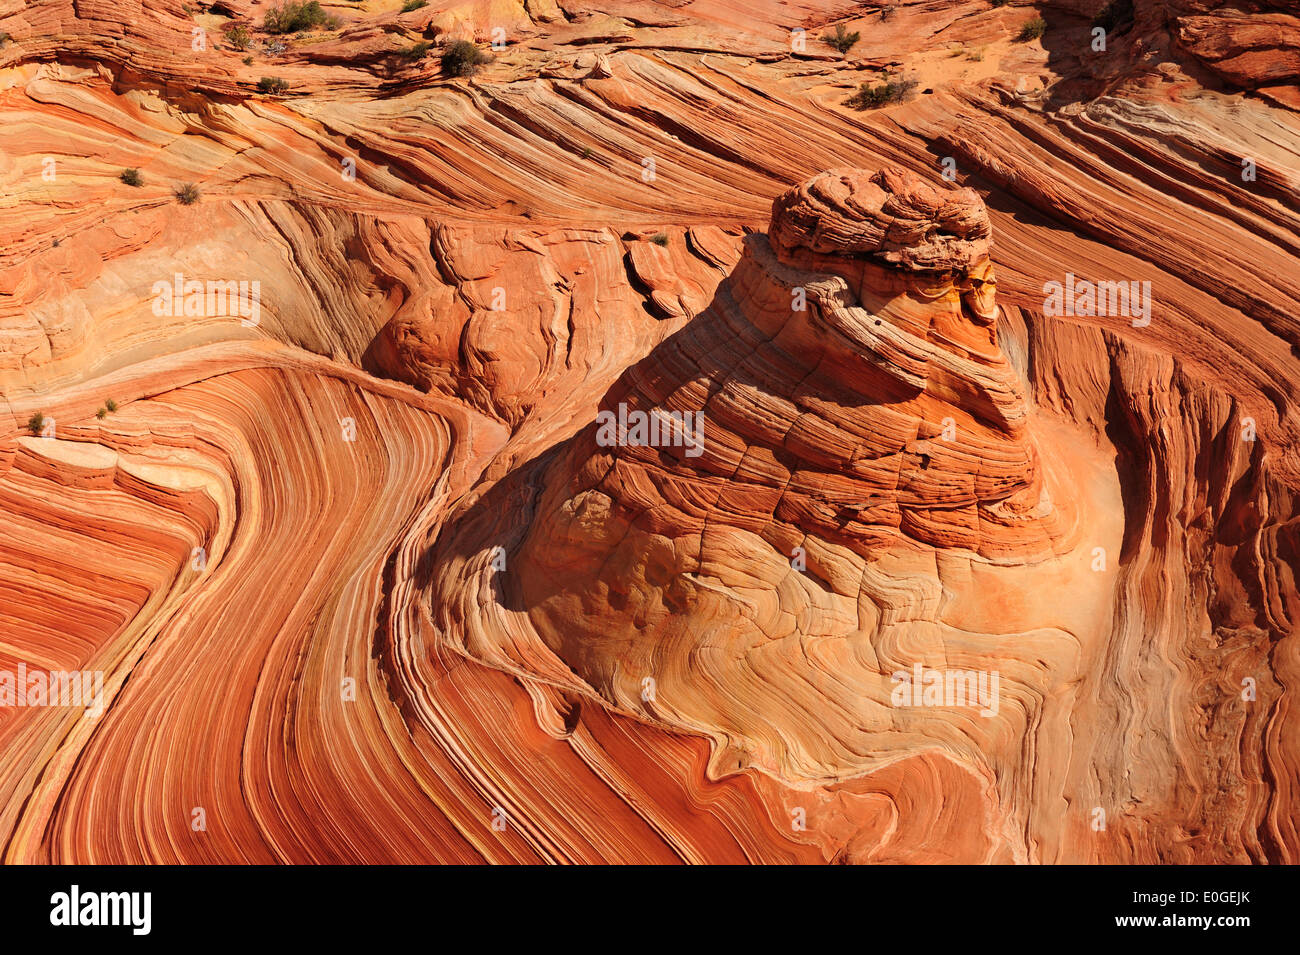 Red sandstone formation, The Wave, Coyote Buttes, Paria Canyon, Vermilion Cliffs National Monument, Arizona, Southwest, USA, Ame Stock Photo